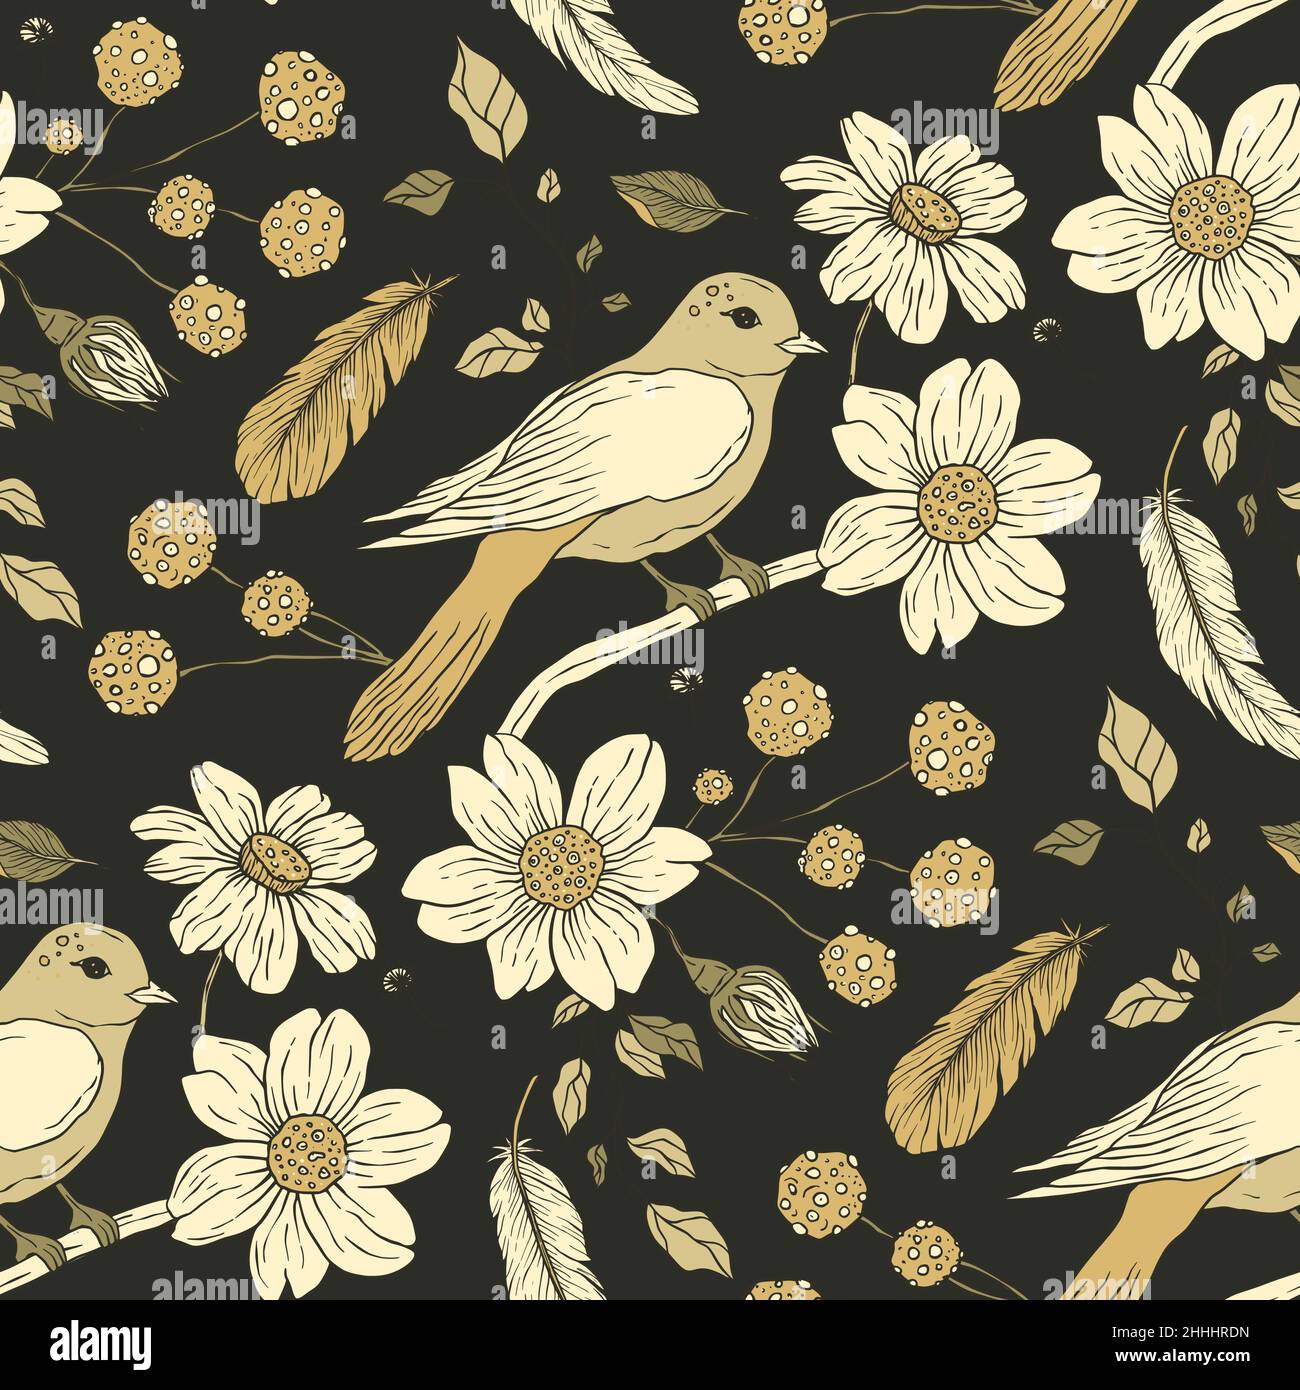 Vintage bird boho floral seamless pattern and daisy flower Stock Vector